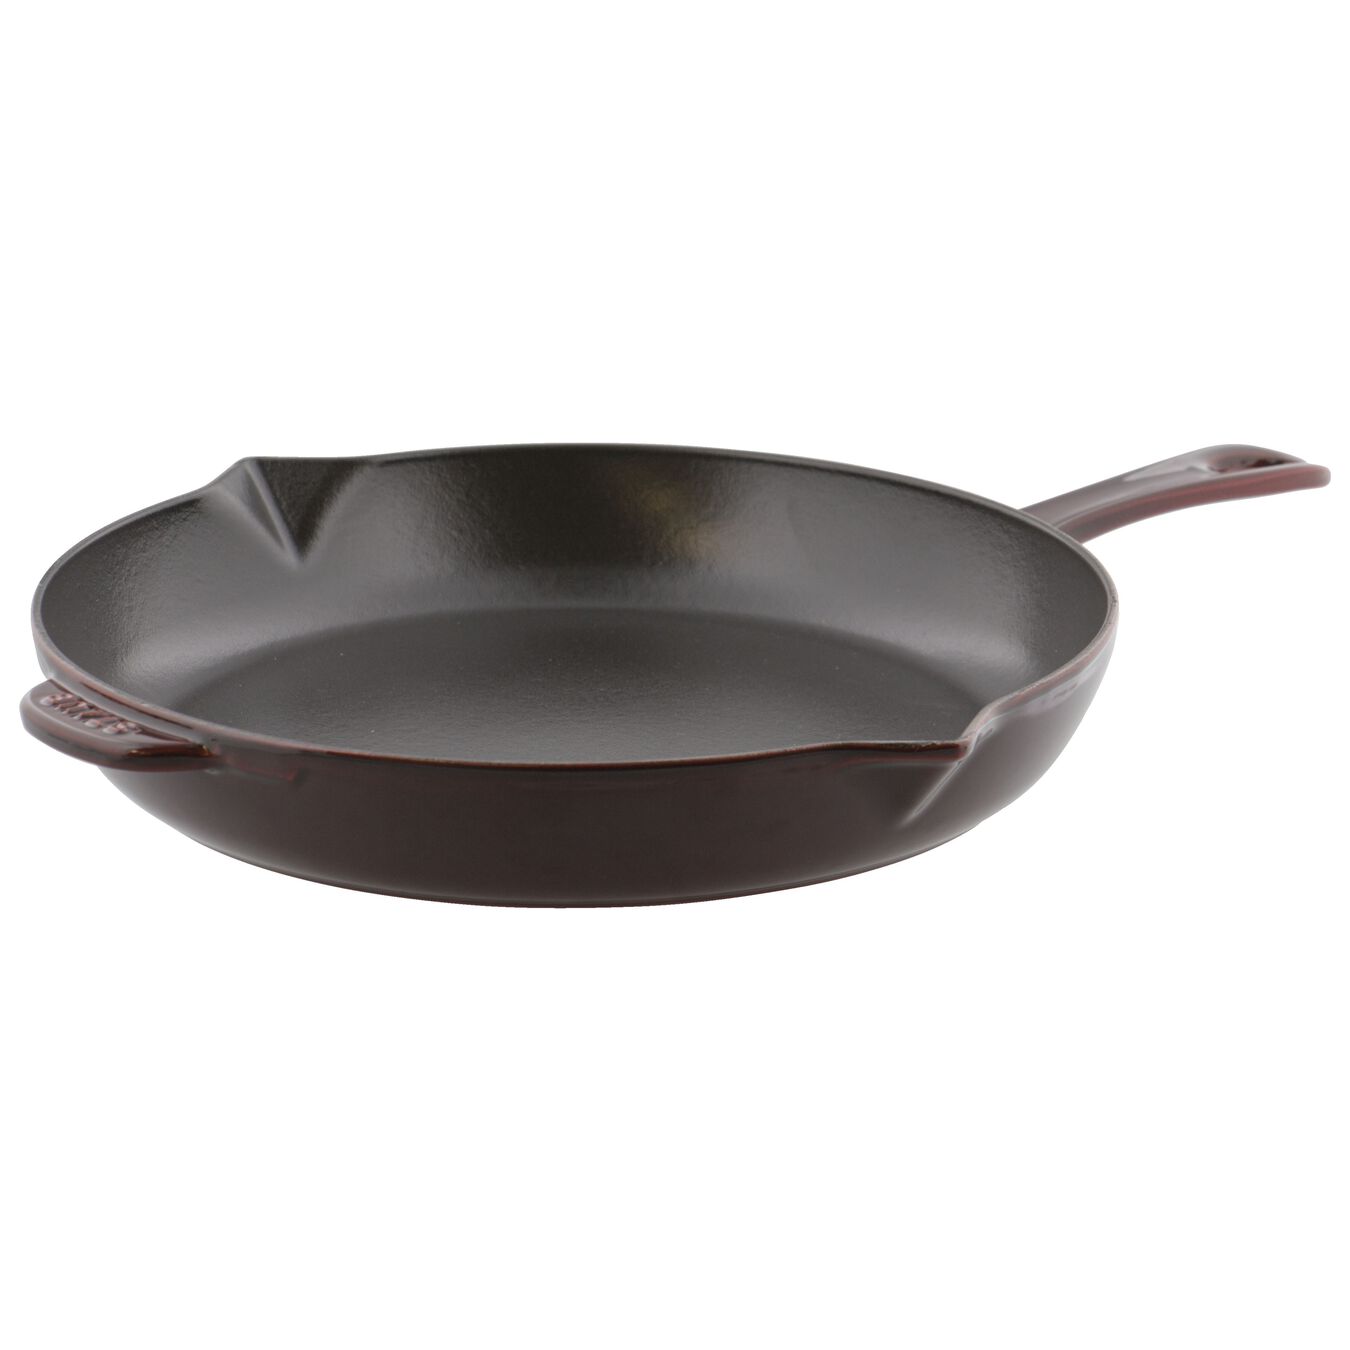 Staub Pans Frying Pan Zwilling Com, Staub Cast Iron 12 Inch Round Steam Griddle Pan Grenadines